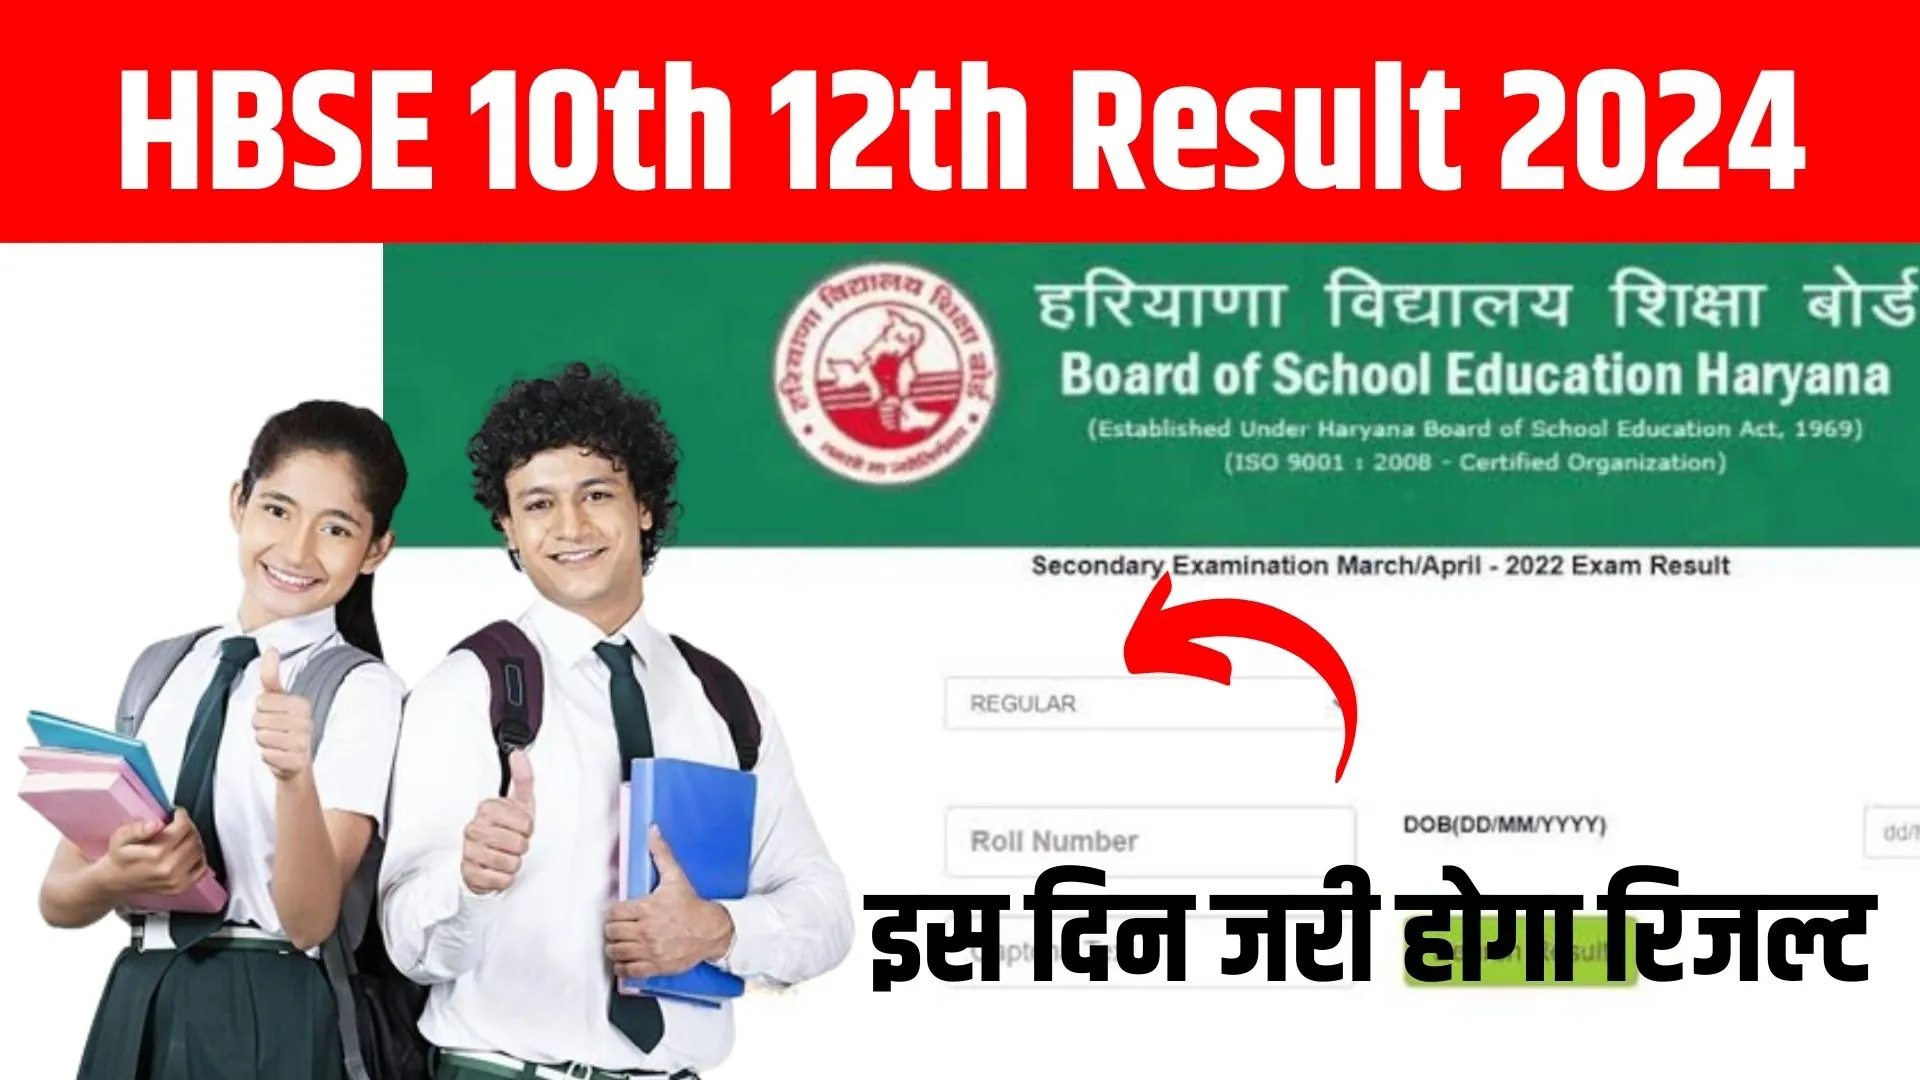 HBSE 10th 12th Result 2024